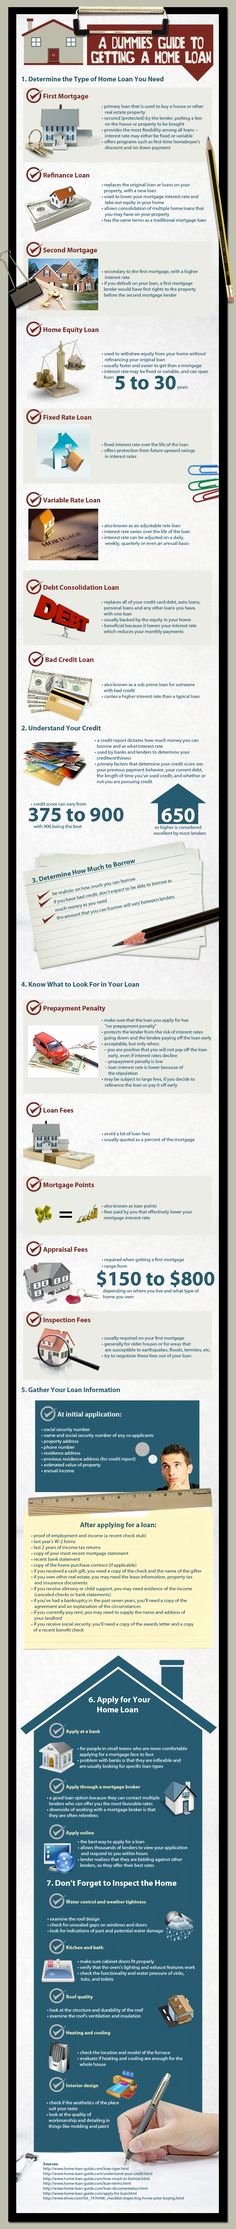 Home Equity Loan Agreement Template New Printable Sample Rental Lease Agreement Templates Free